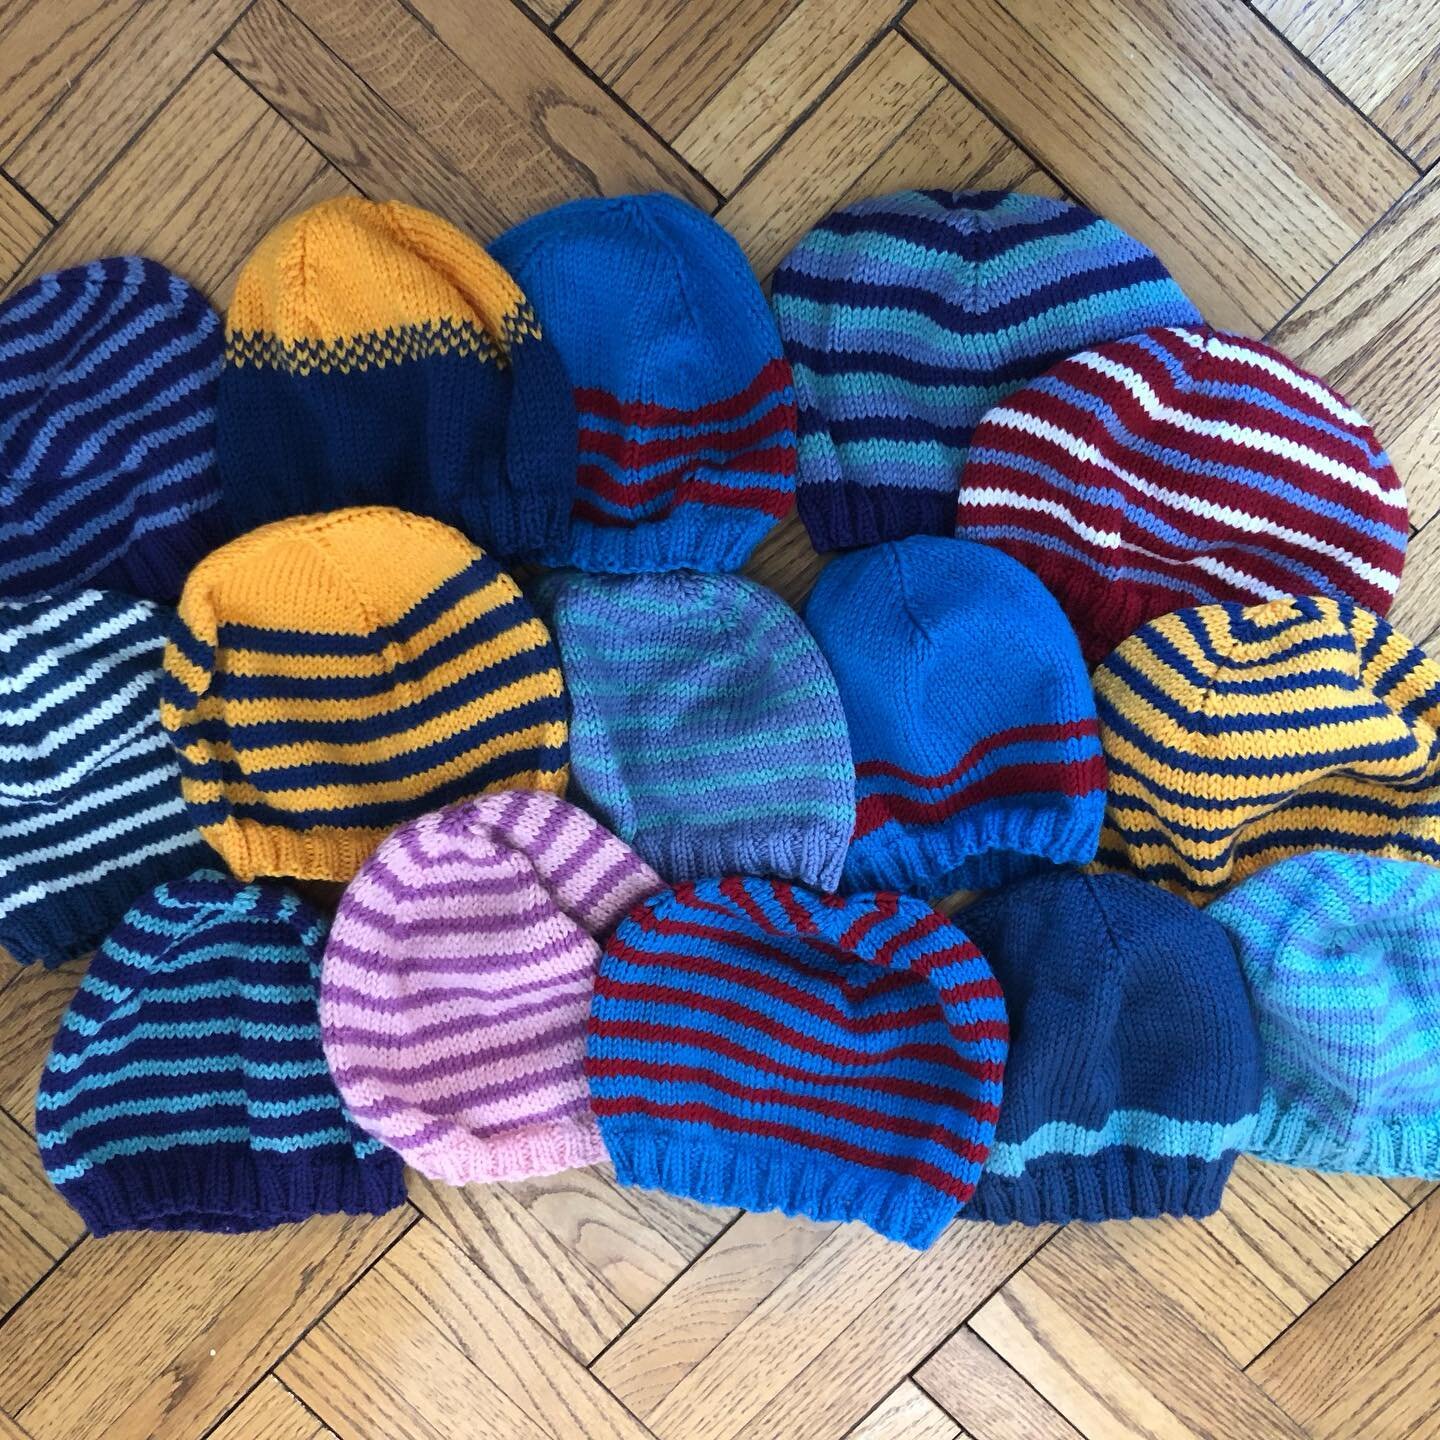 Prepping these hats today to send off to @hatsforsailors! They are all the pattern #turnasquare by @brooklyntweed but I make sure that they are all unique with different striping and color combinations. This is my favorite project for when I don&rsqu